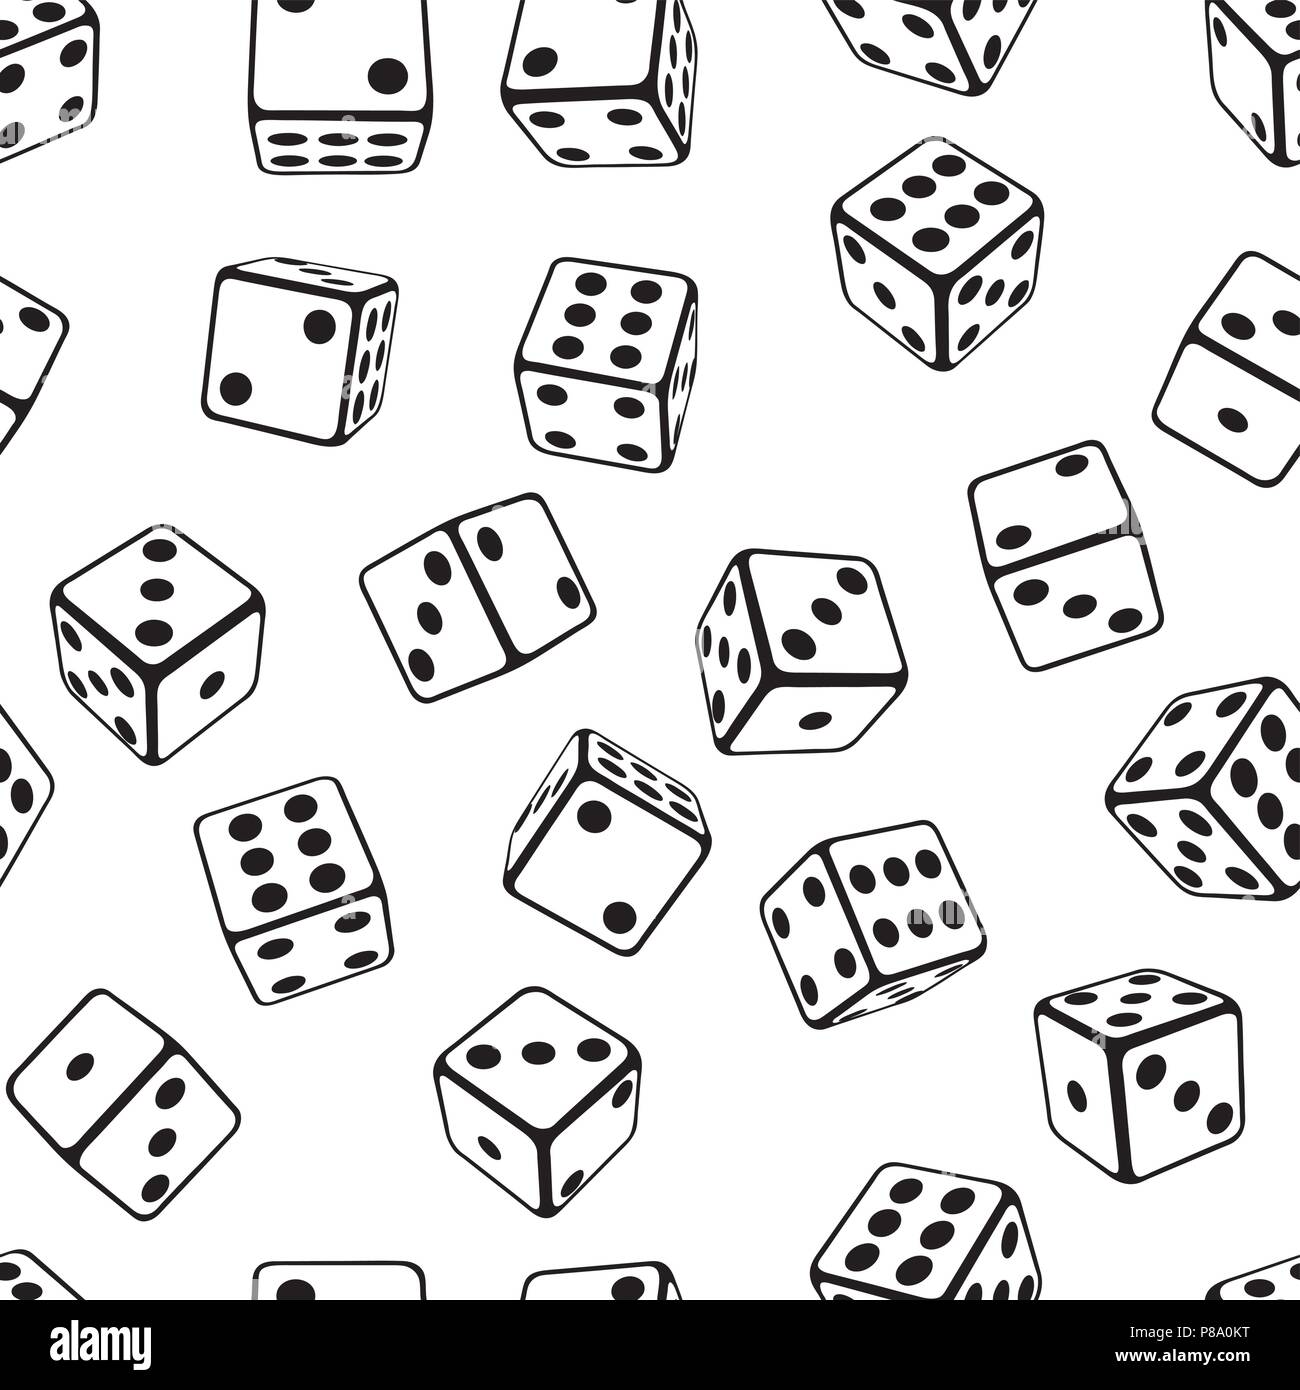 Blank dice Black and White Stock Photos & Images - Alamy